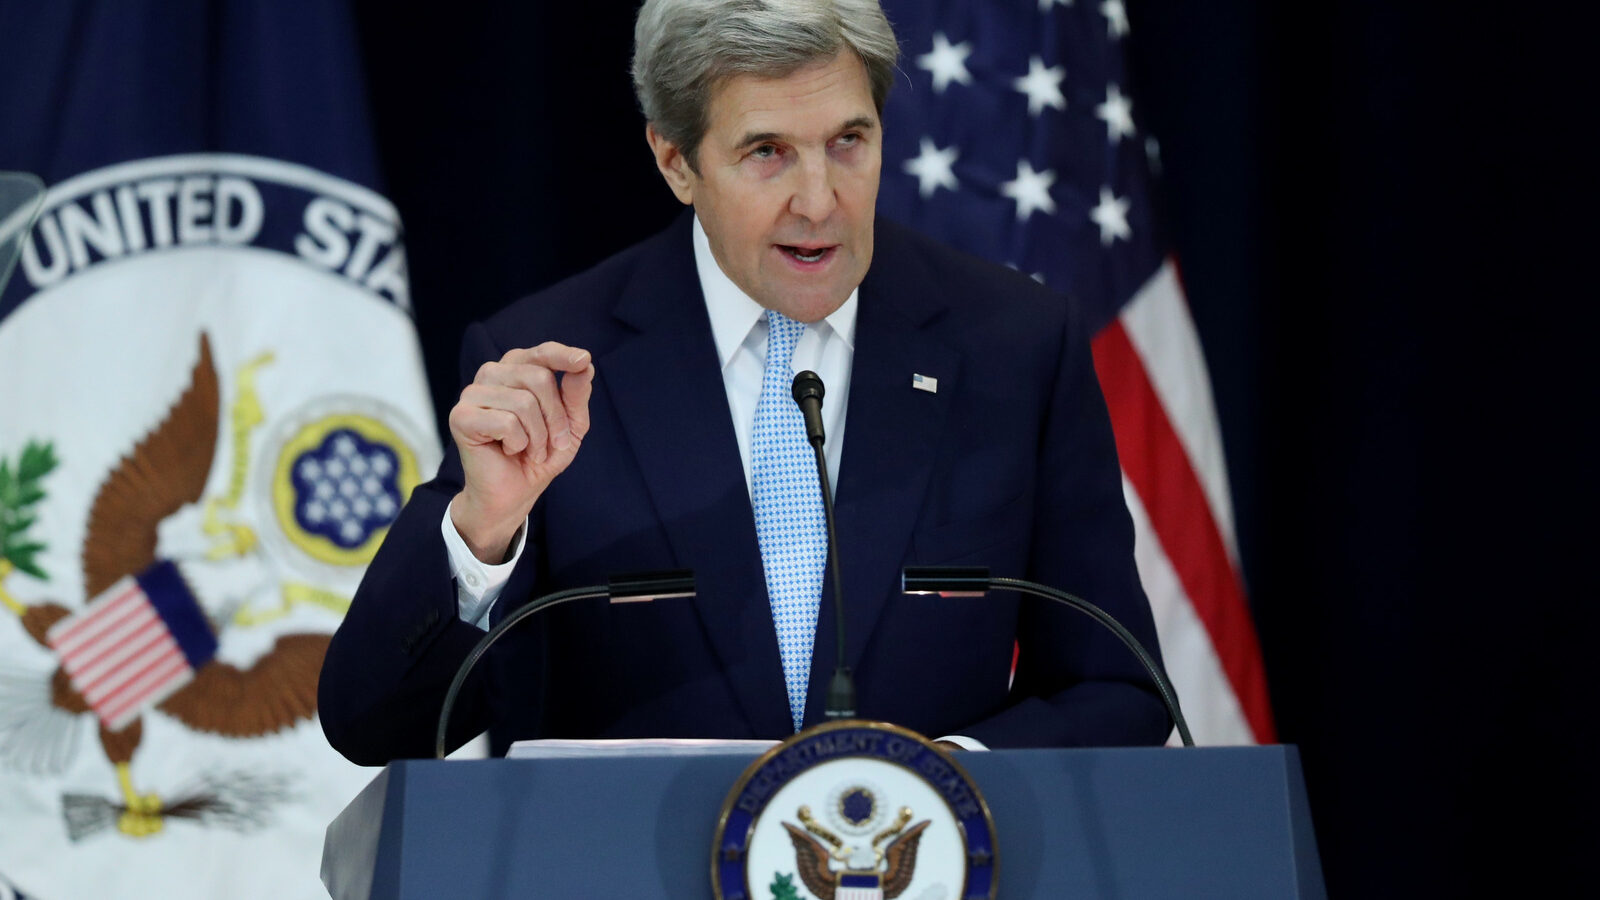 Secretary of State John Kerry speaks about Israeli-Palestinian policy, Wednesday, Dec. 28, 2016, at the State Department in Washington. (AP Photo/Andrew Harnik)